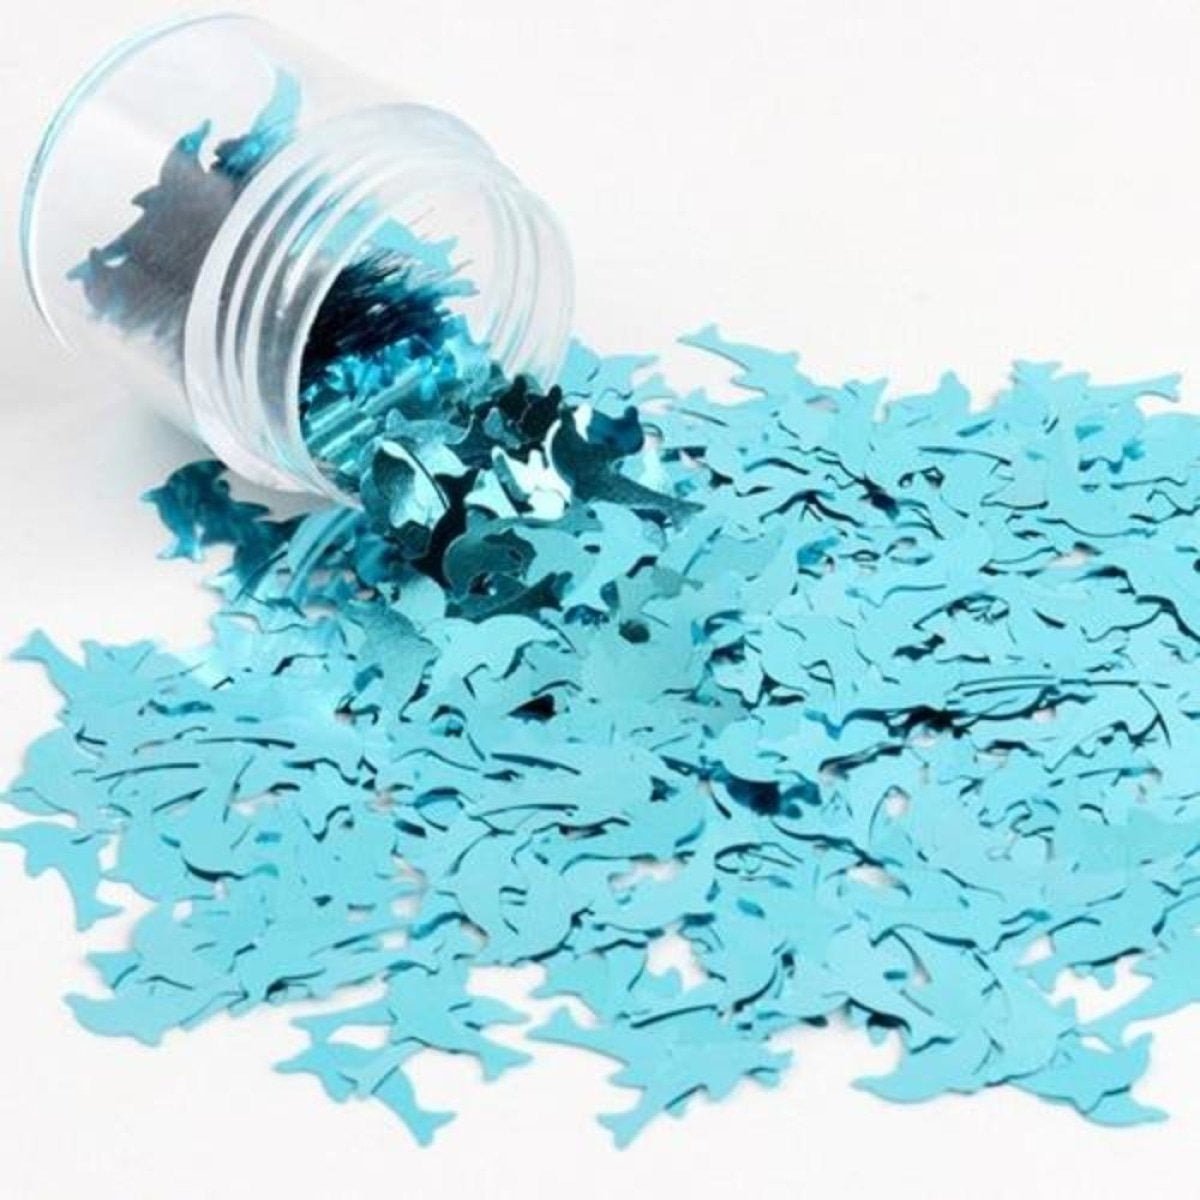 8g Holographic Nail Art Sequins 10mm Dolphin Turtle Glitter Sequin Decoration - Aqua / Blue Dolphin - Asia Sell